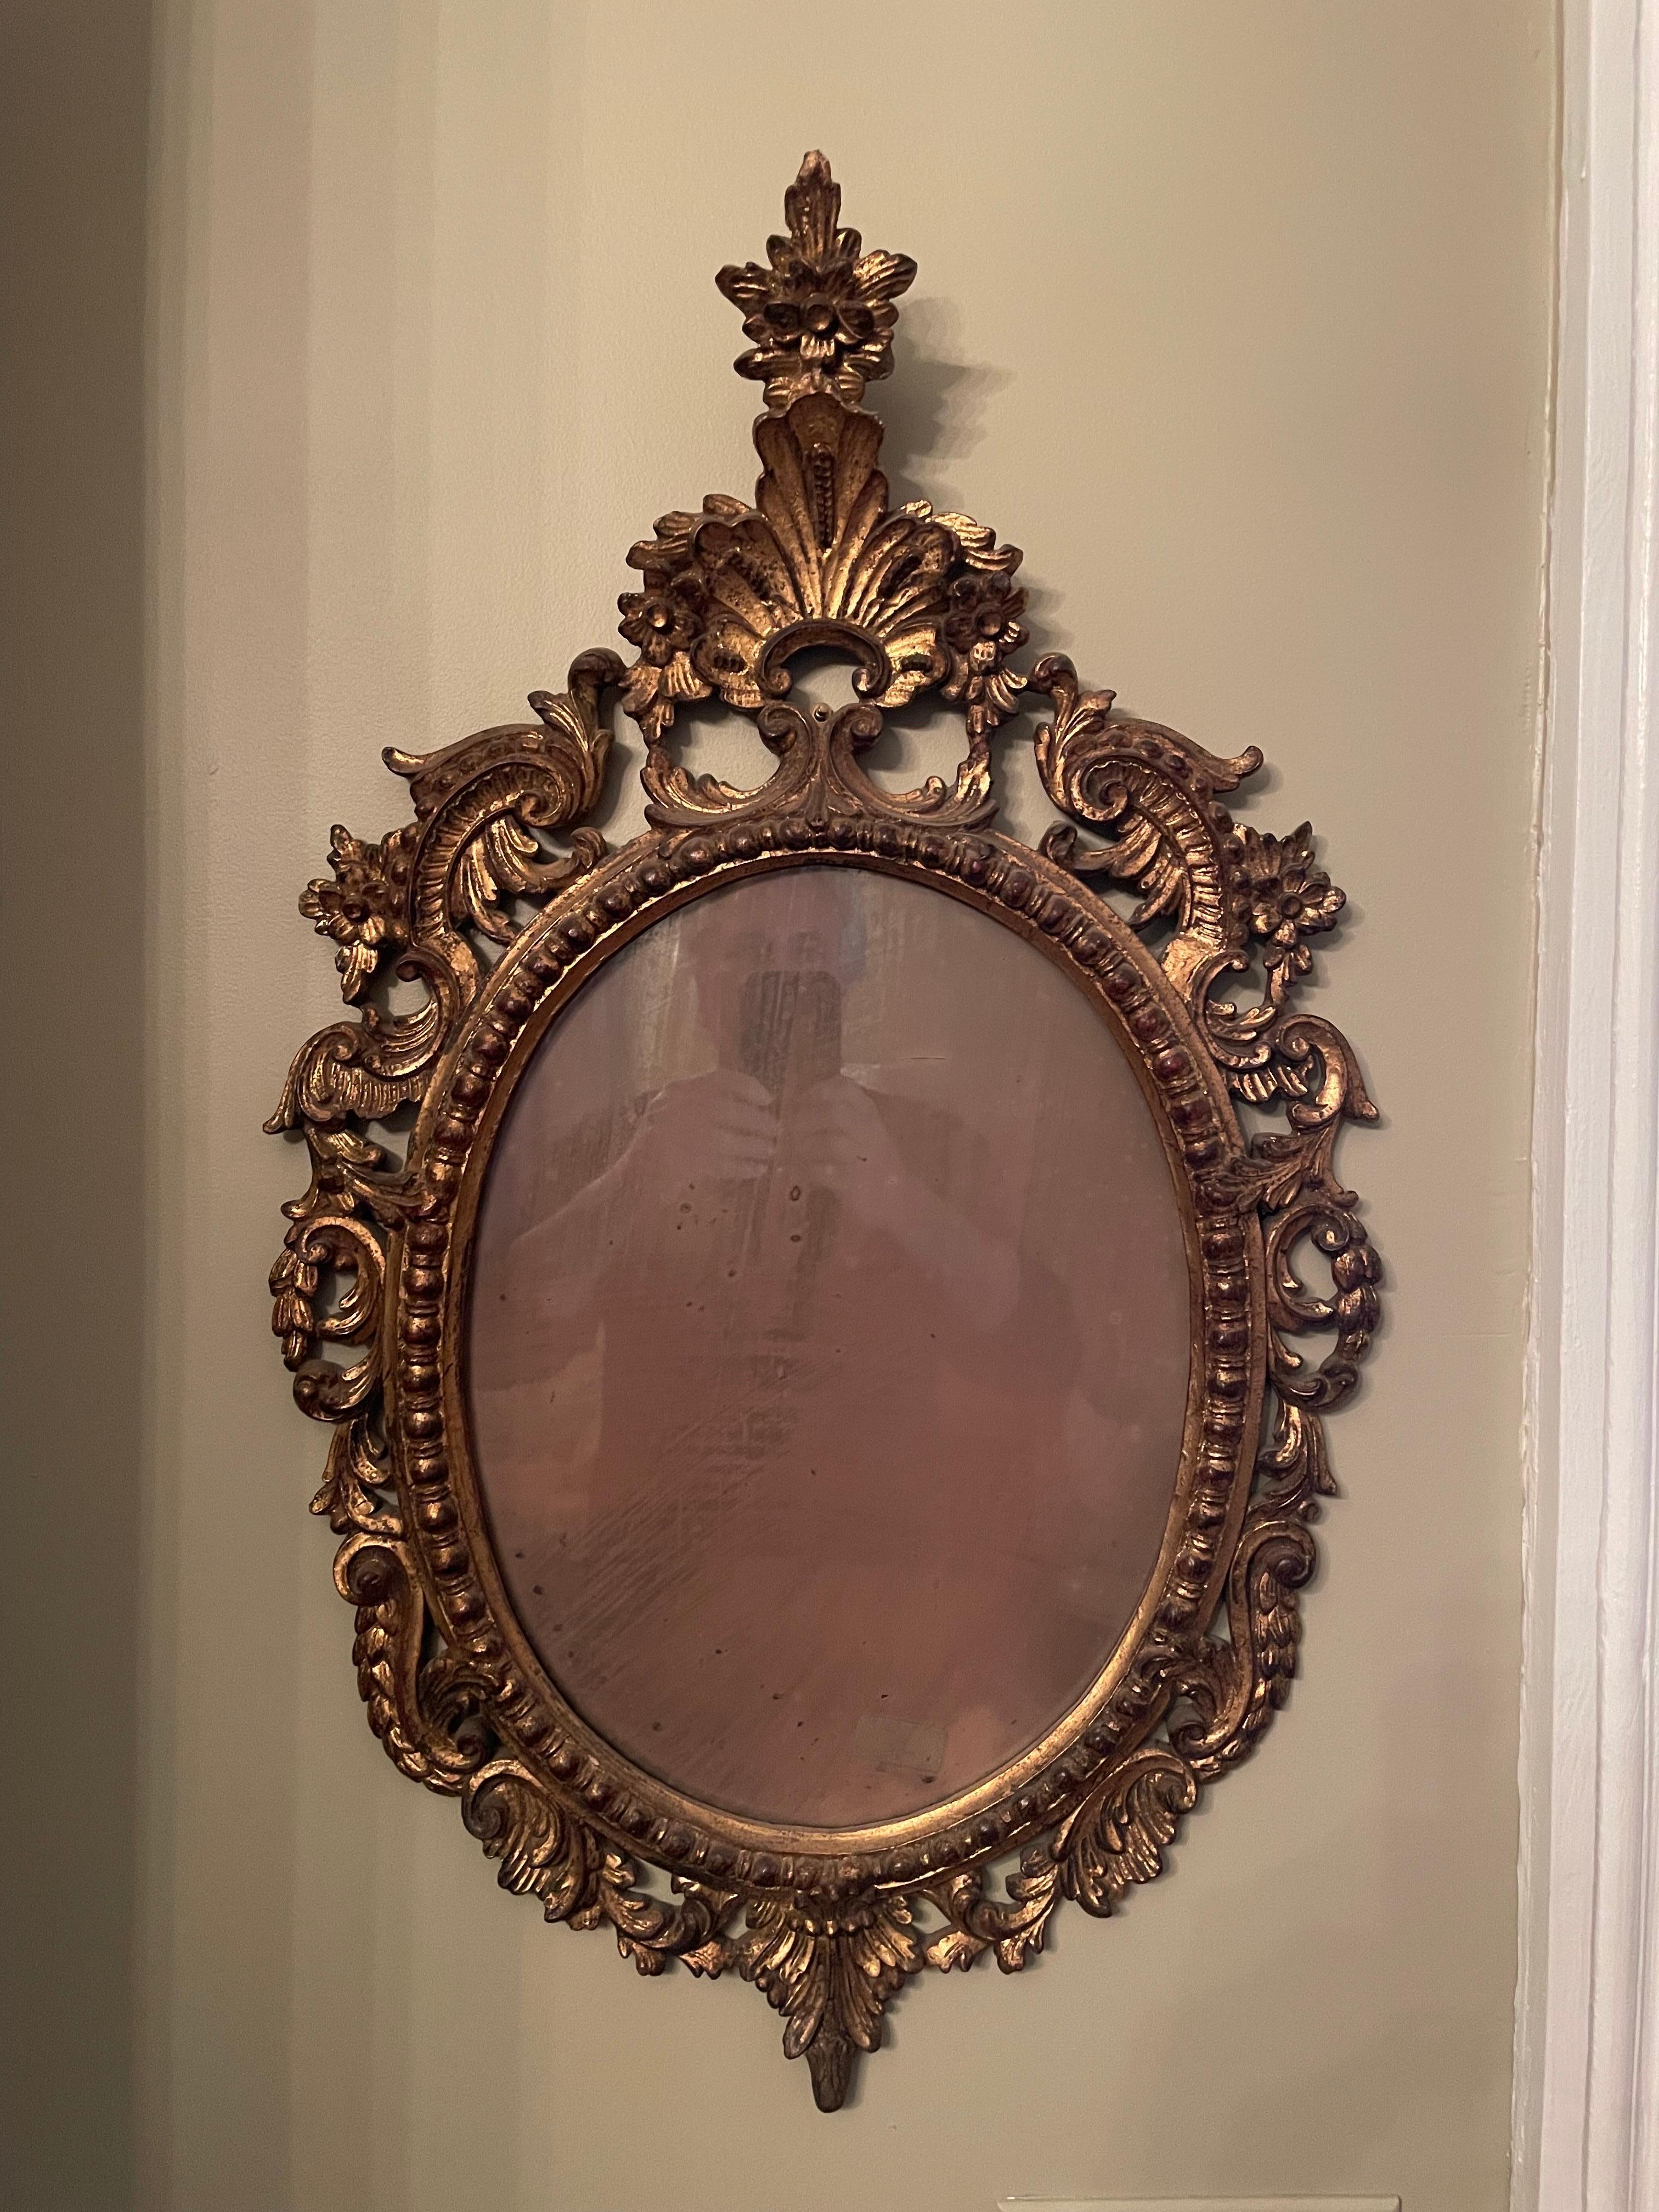 Great antique carved Rococo style giltwood Italian mirror. Distressed original mirror glass as shown in photos. Good overall condition . Measures 30